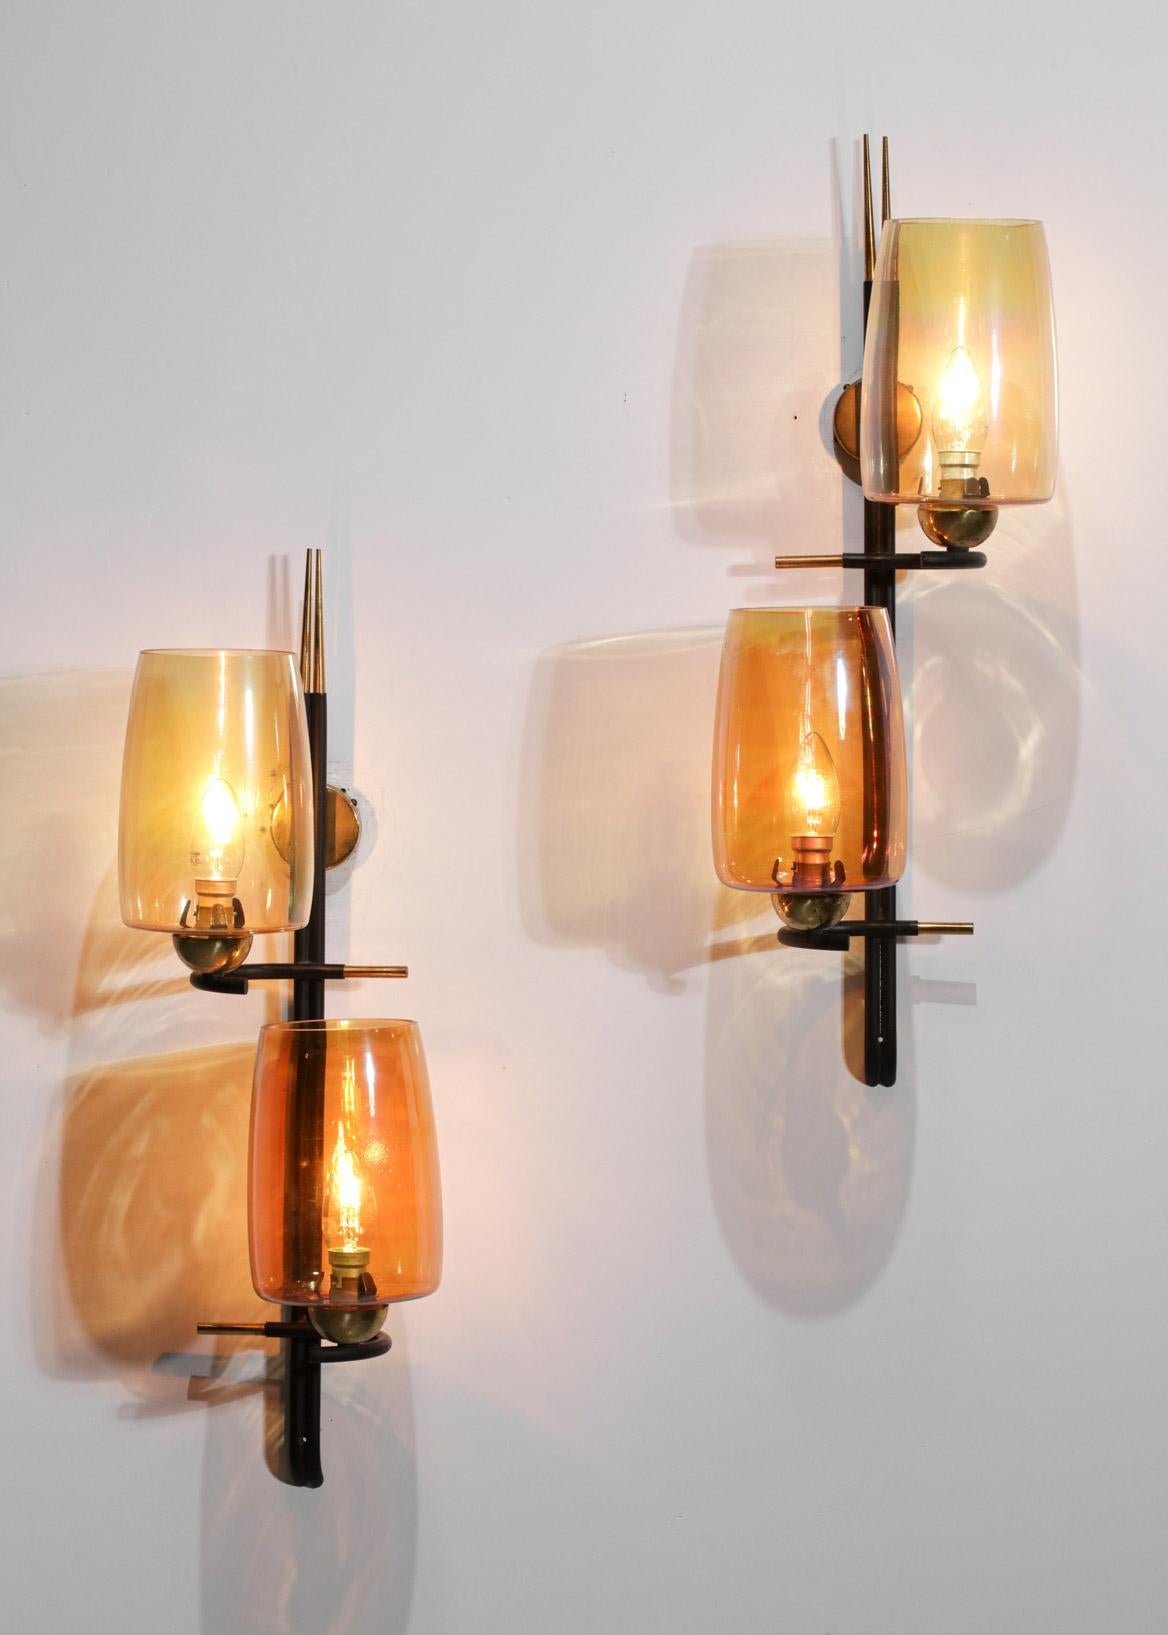 Pair of French wall lights from the 50s/60s in the Scandinavian design style of the time. Black lacquered metal structure, wall plate and solid brass finish. Shade in iridescent glass coloured in a cameo of orange. Excellent vintage condition,